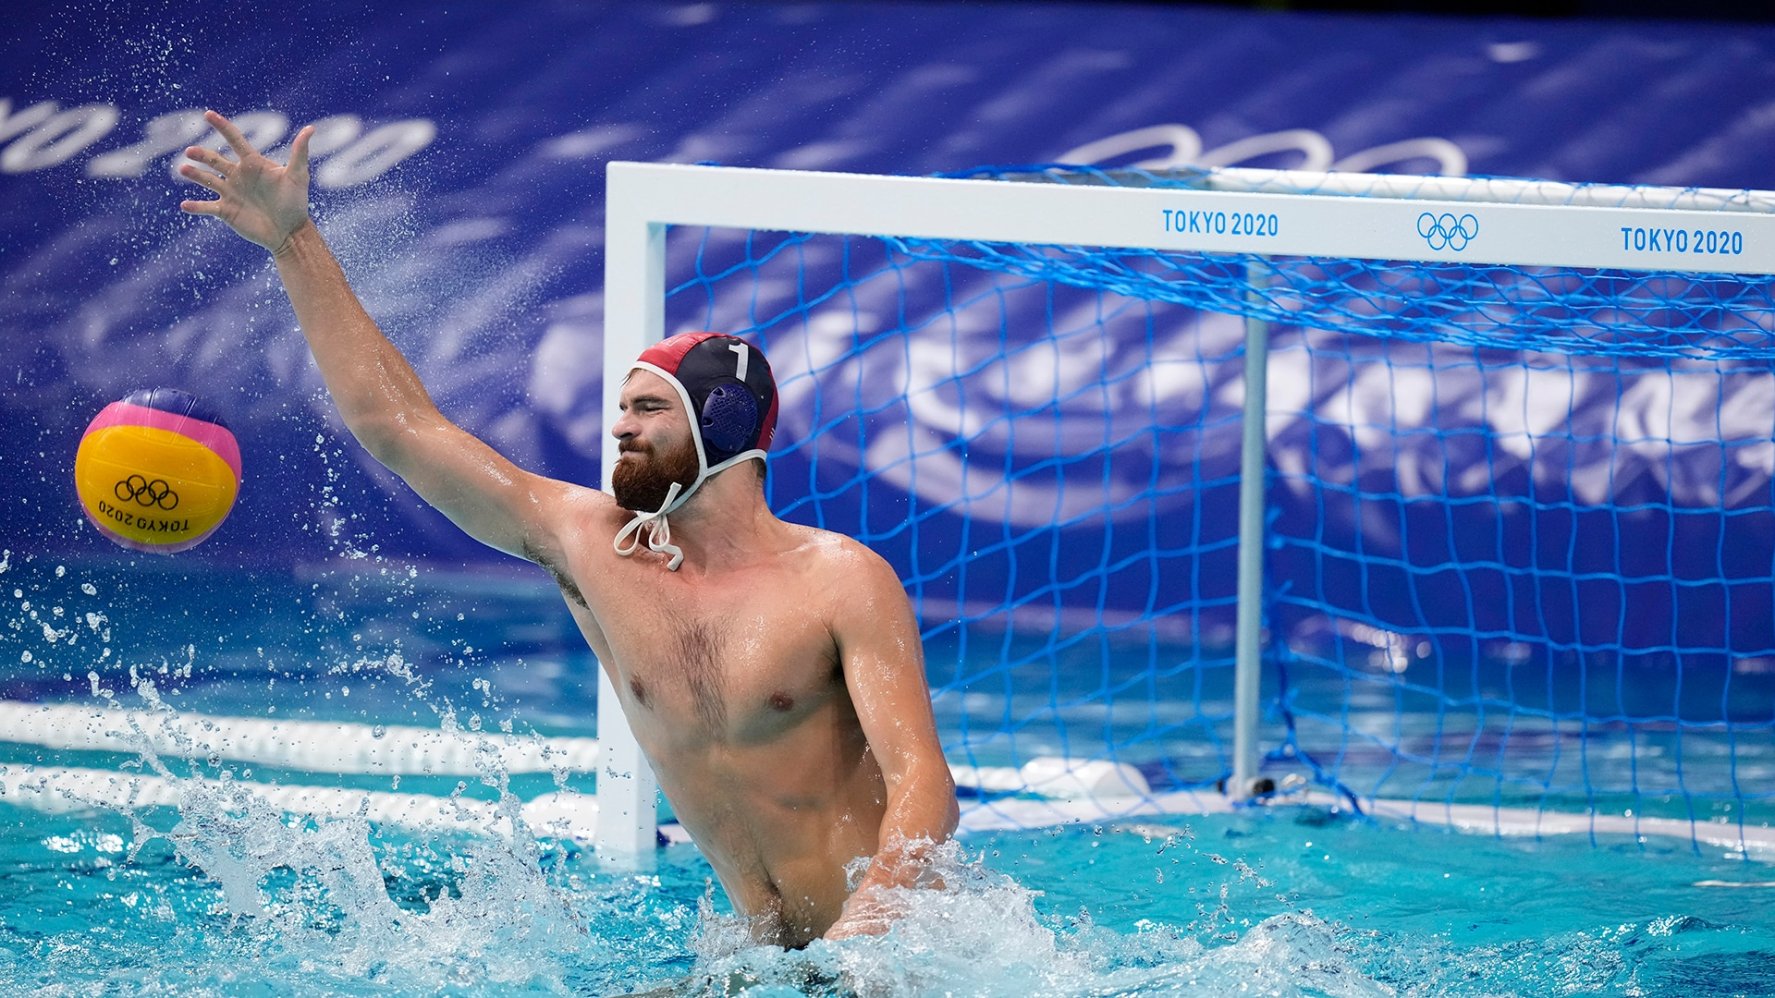 U.S. Men’s Water Polo Dismantles South Africa for 203 Victory NBC